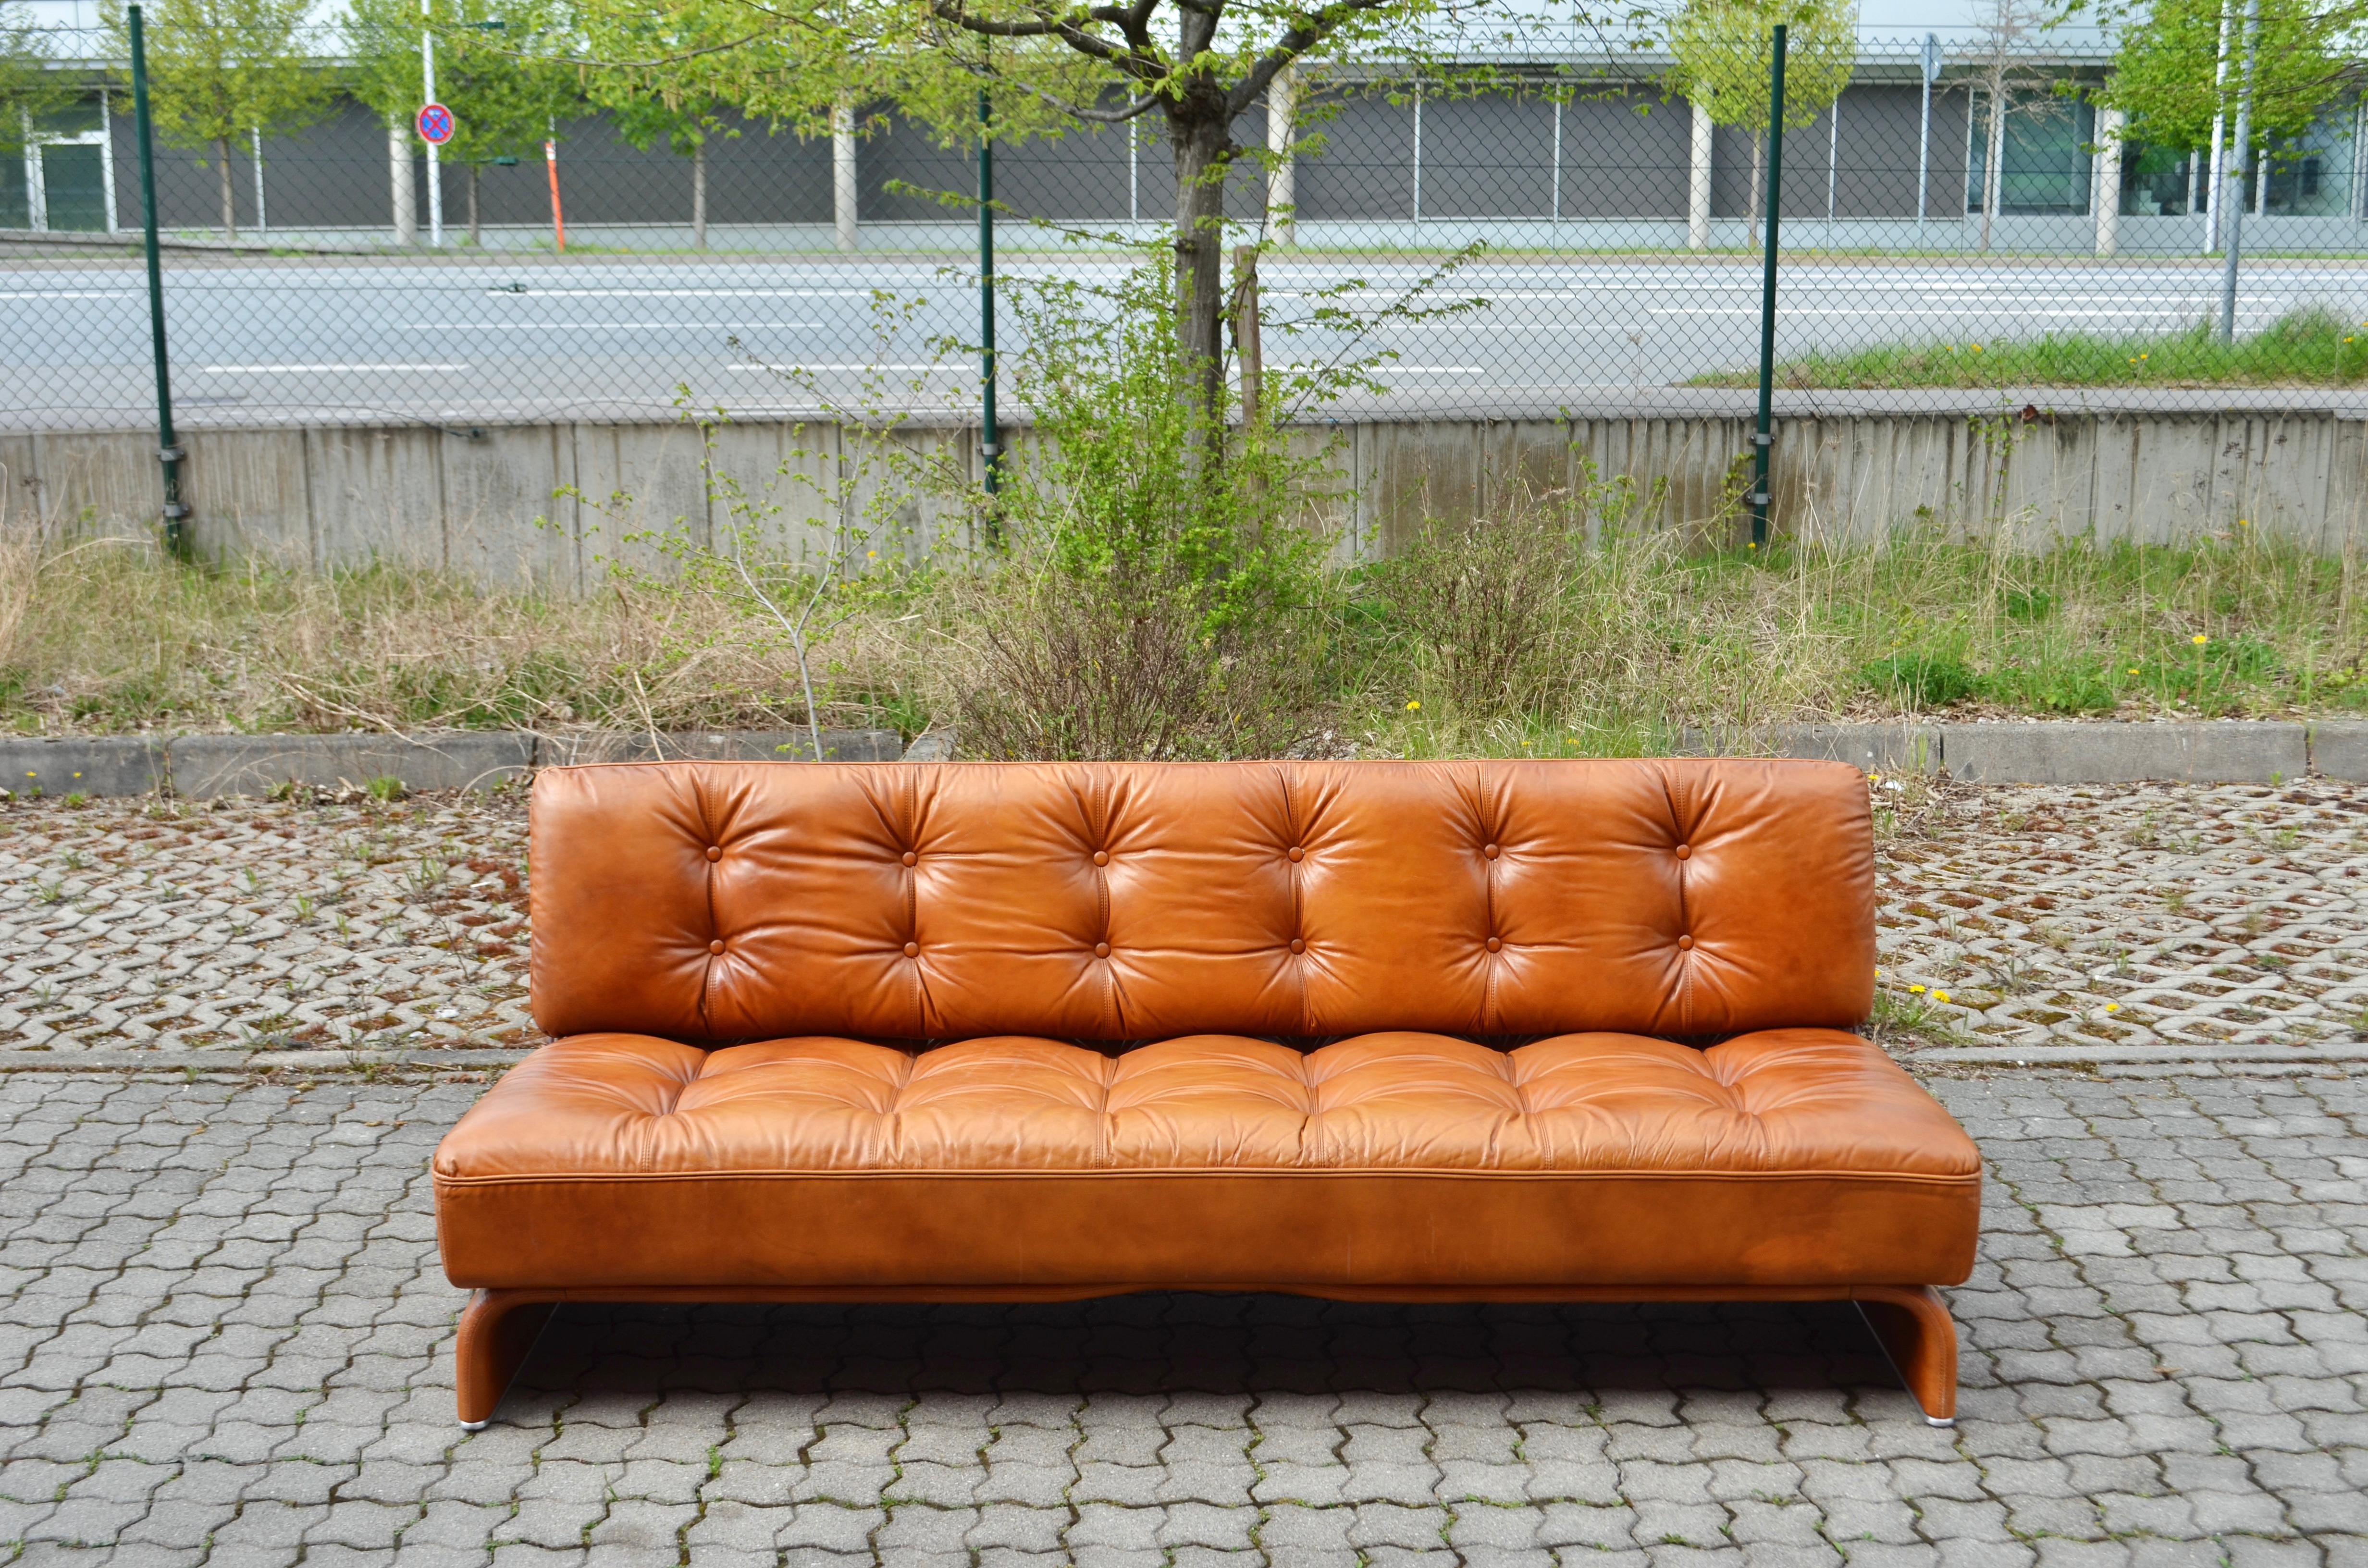 Daybed Modell Constanze by Austrian architect Johannes Spalt for Wittmann. 
A classic Mid Century Daybed in tufted design.
Produced in the 1960s.
Cognac Semianiline leather. The sofa is convertible into a daybed. 
Best condition
Size 198 x 107